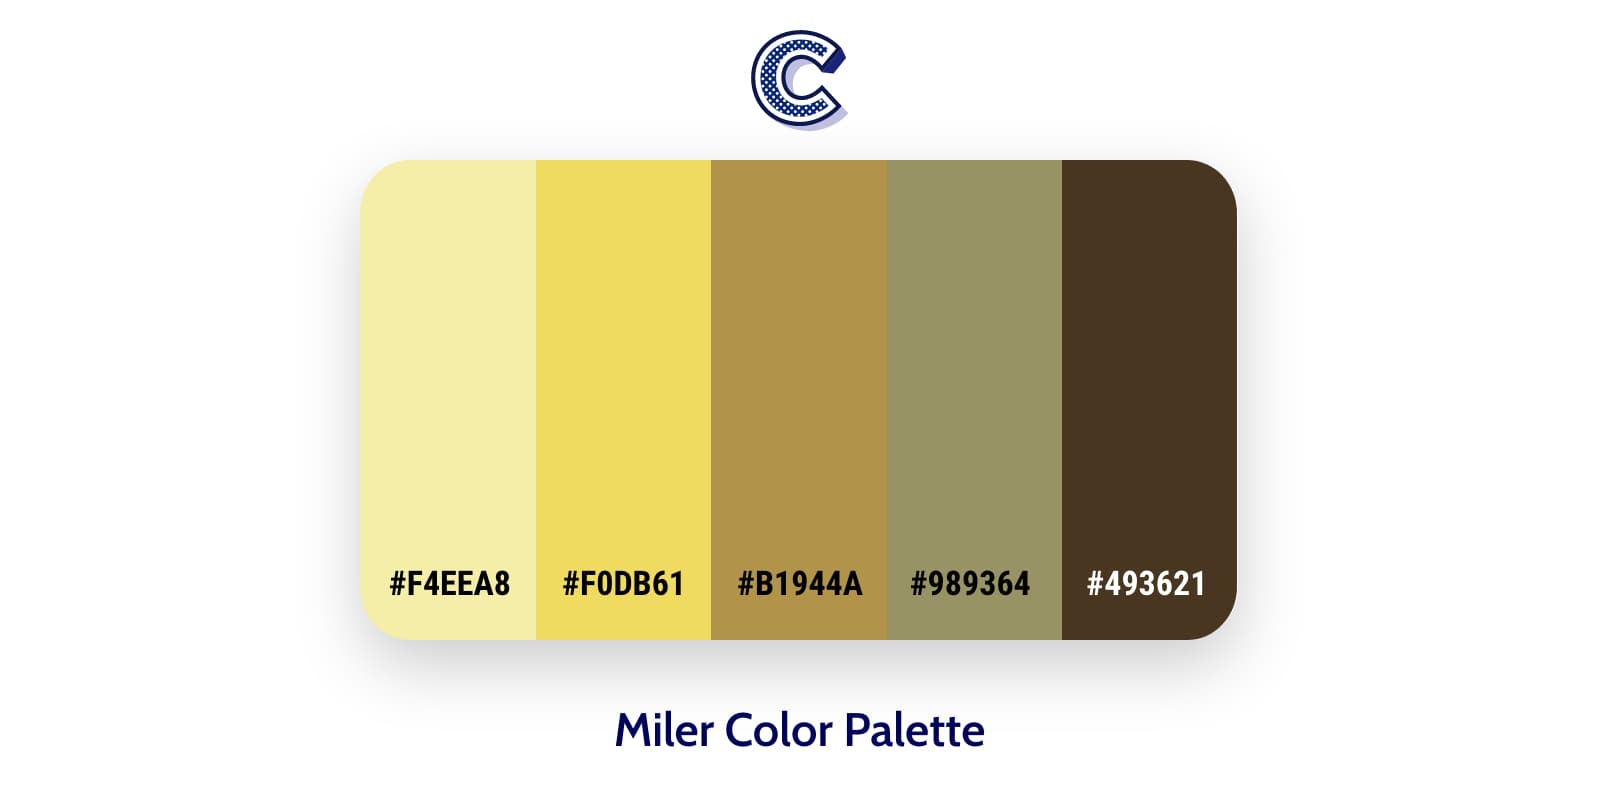 the featured image of miller color palette